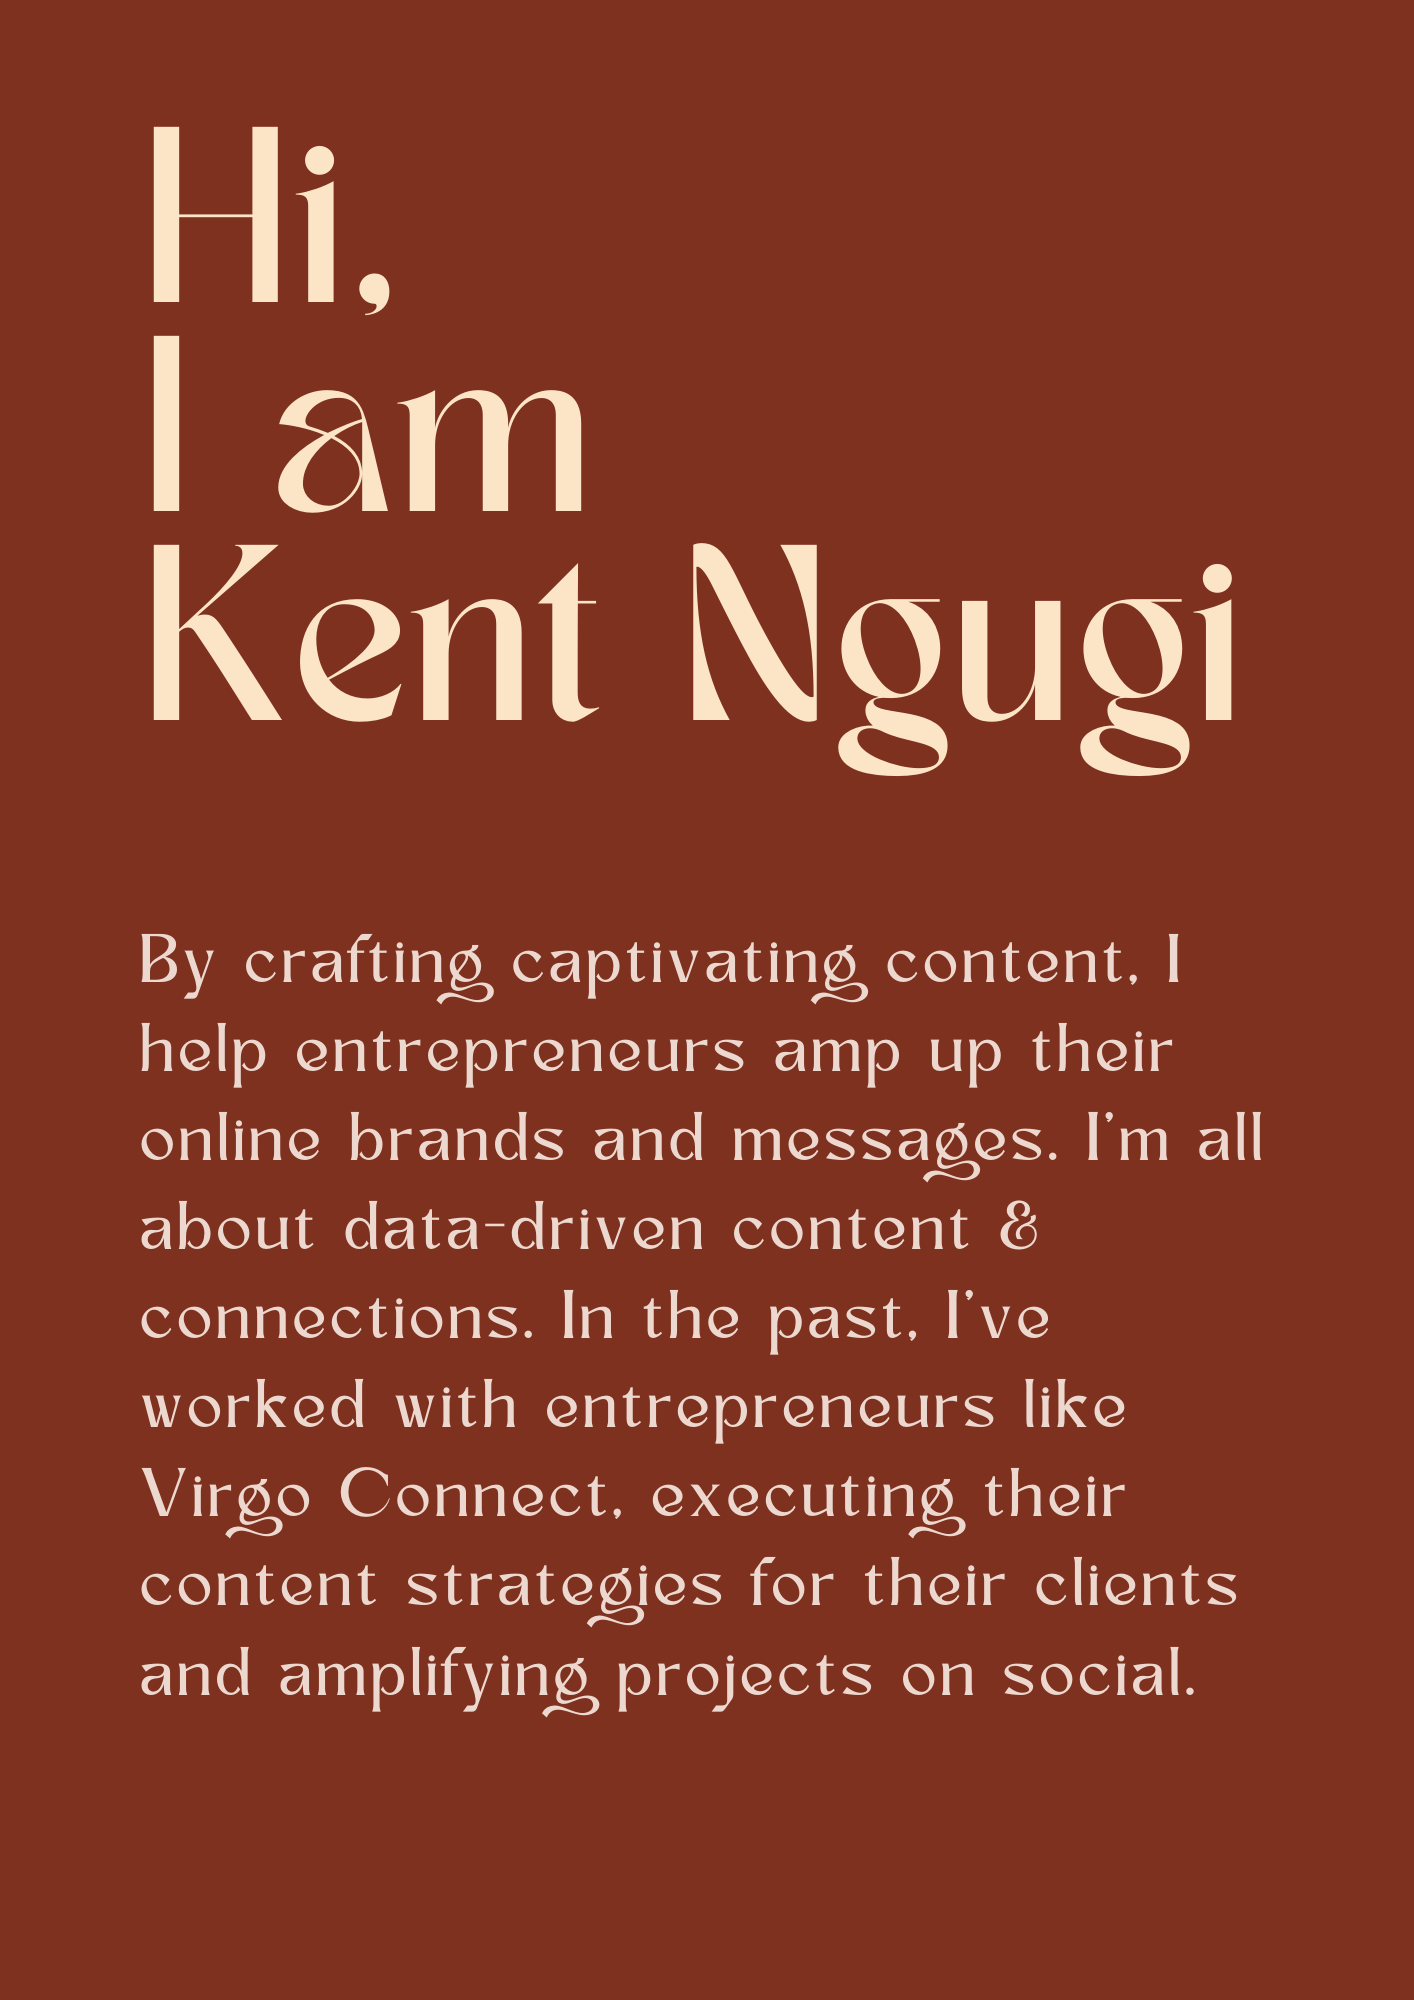 Hi.
Kl
Kent NQugi

By crafting captivating content. |
help entrepreneurs amp up their
online brands and messages. I'm all
about data-driven content &
connections. In the past. I've
worked with entrepreneurs like
Virgo Connect. executing, their
content strategjes for their clients
and amplifying projects on social.